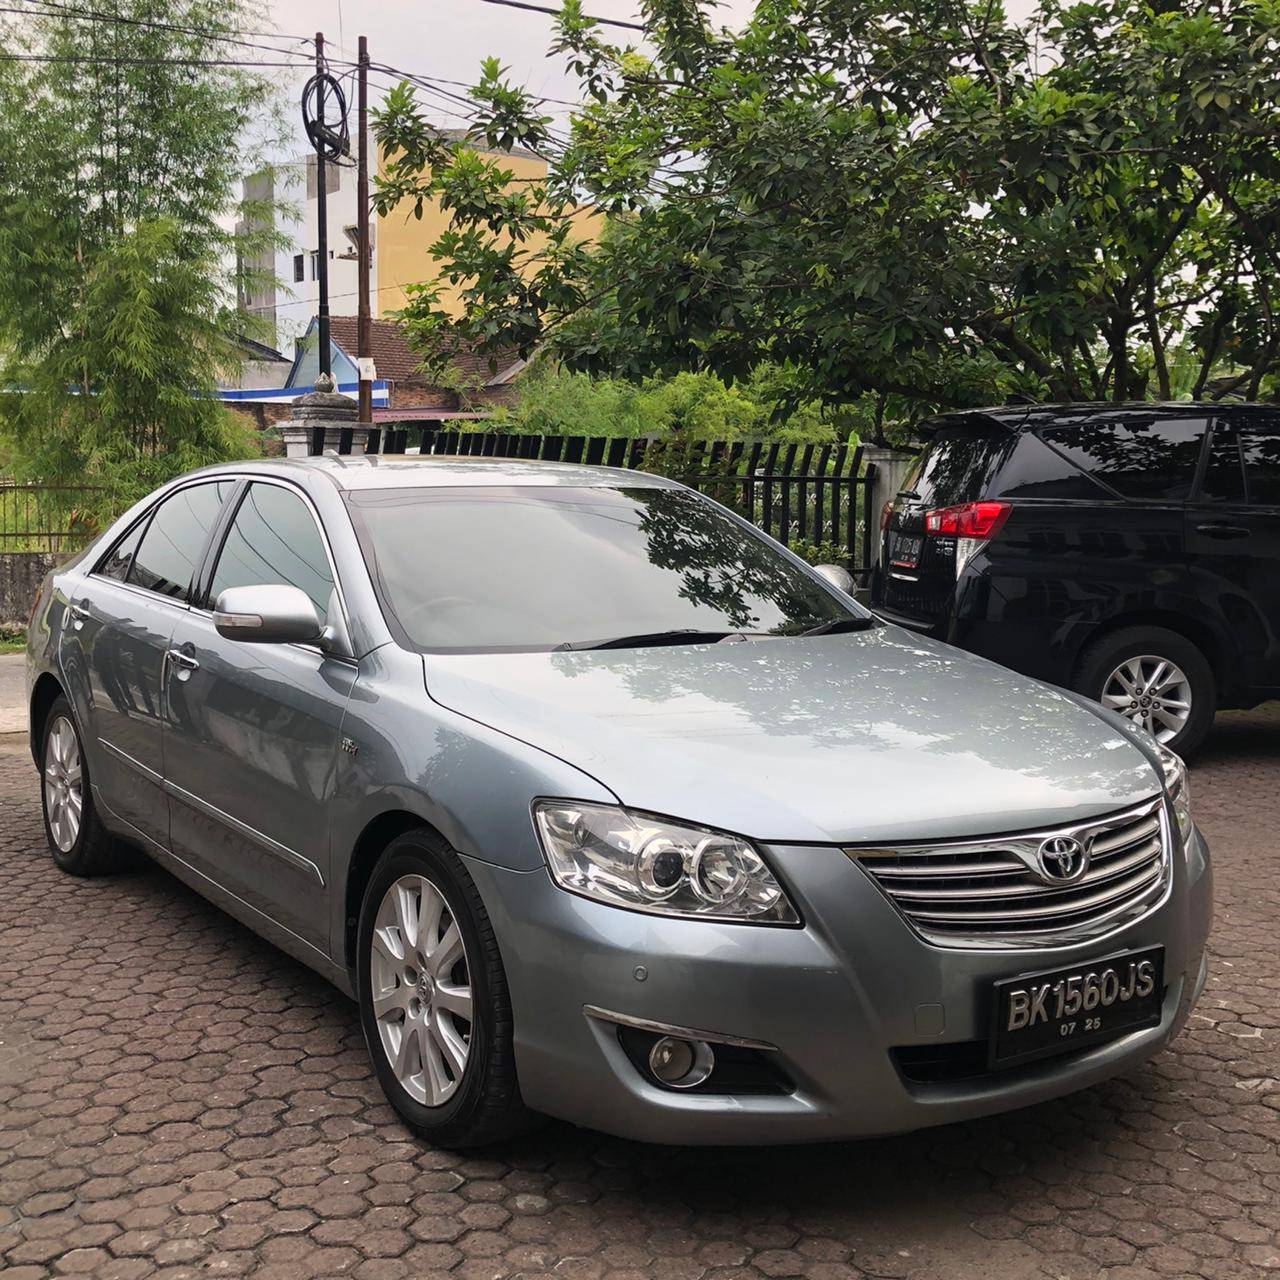 Old 2008 Toyota Camry  V 2.4 A/T LUX V 2.4 A/T LUX